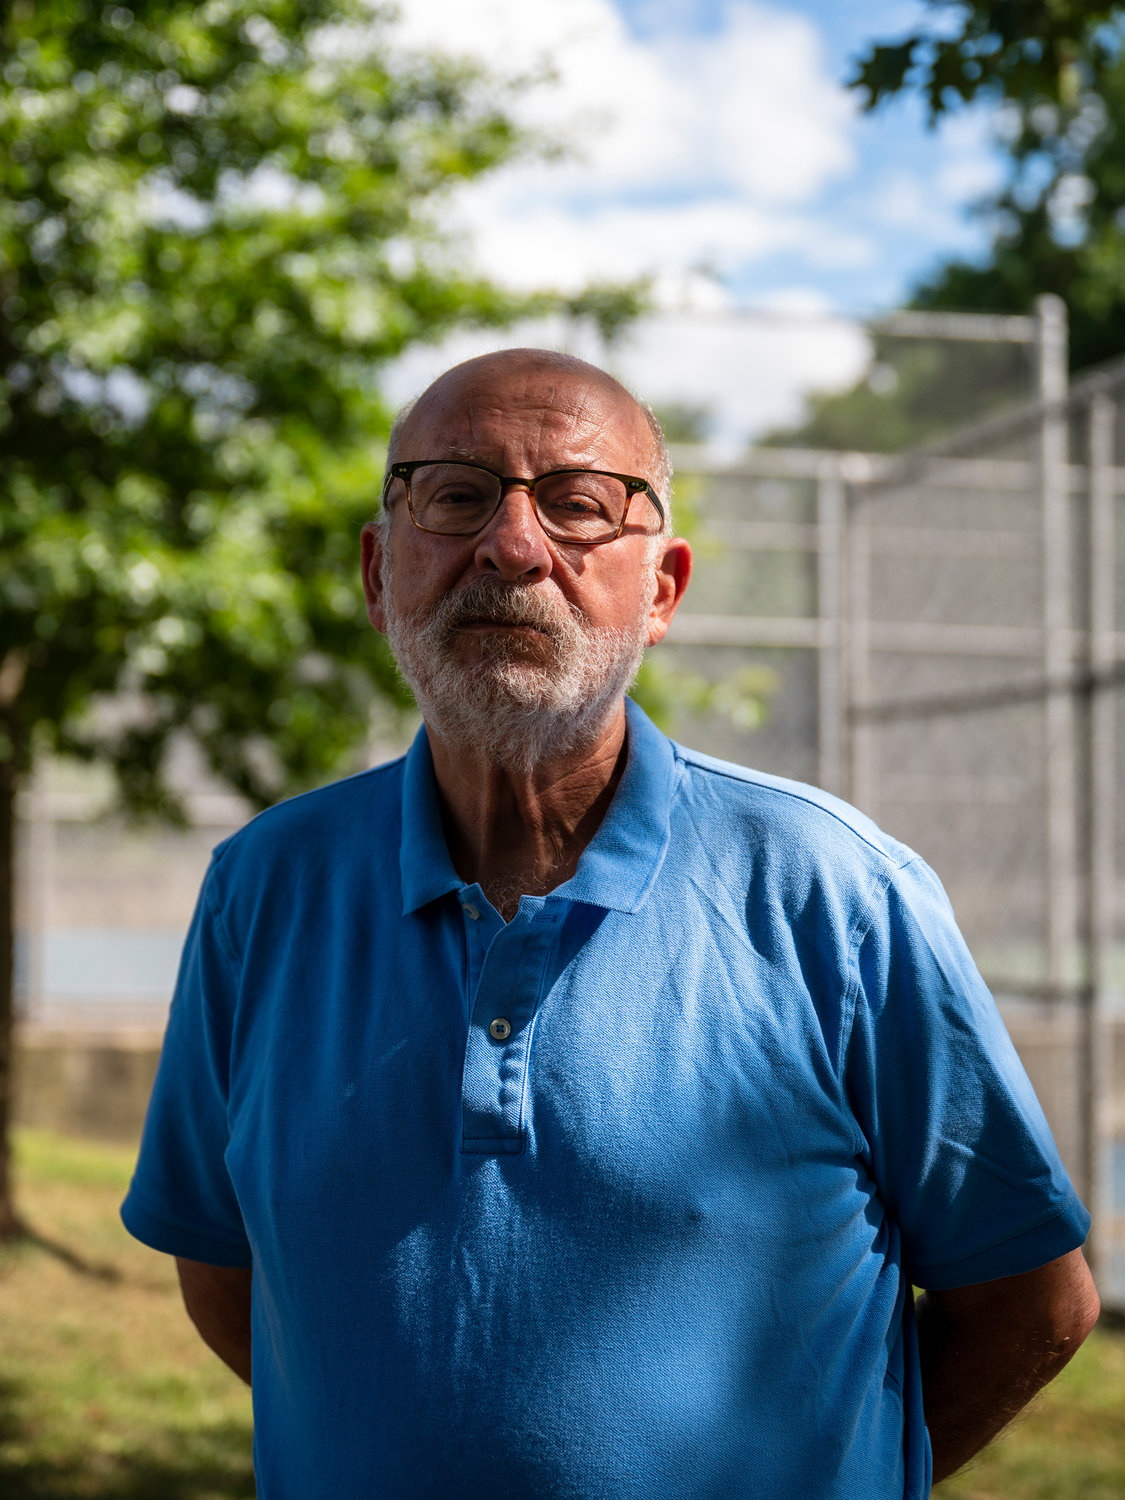 Alex Rosenblum, a retired lawyer and sports enthusiast, picked up pickleball as he got older while in Florida. He felt that his home in the Bronx should play it, too. But there is only one court. He currently is reaching out to local officials to support his interest for the community.